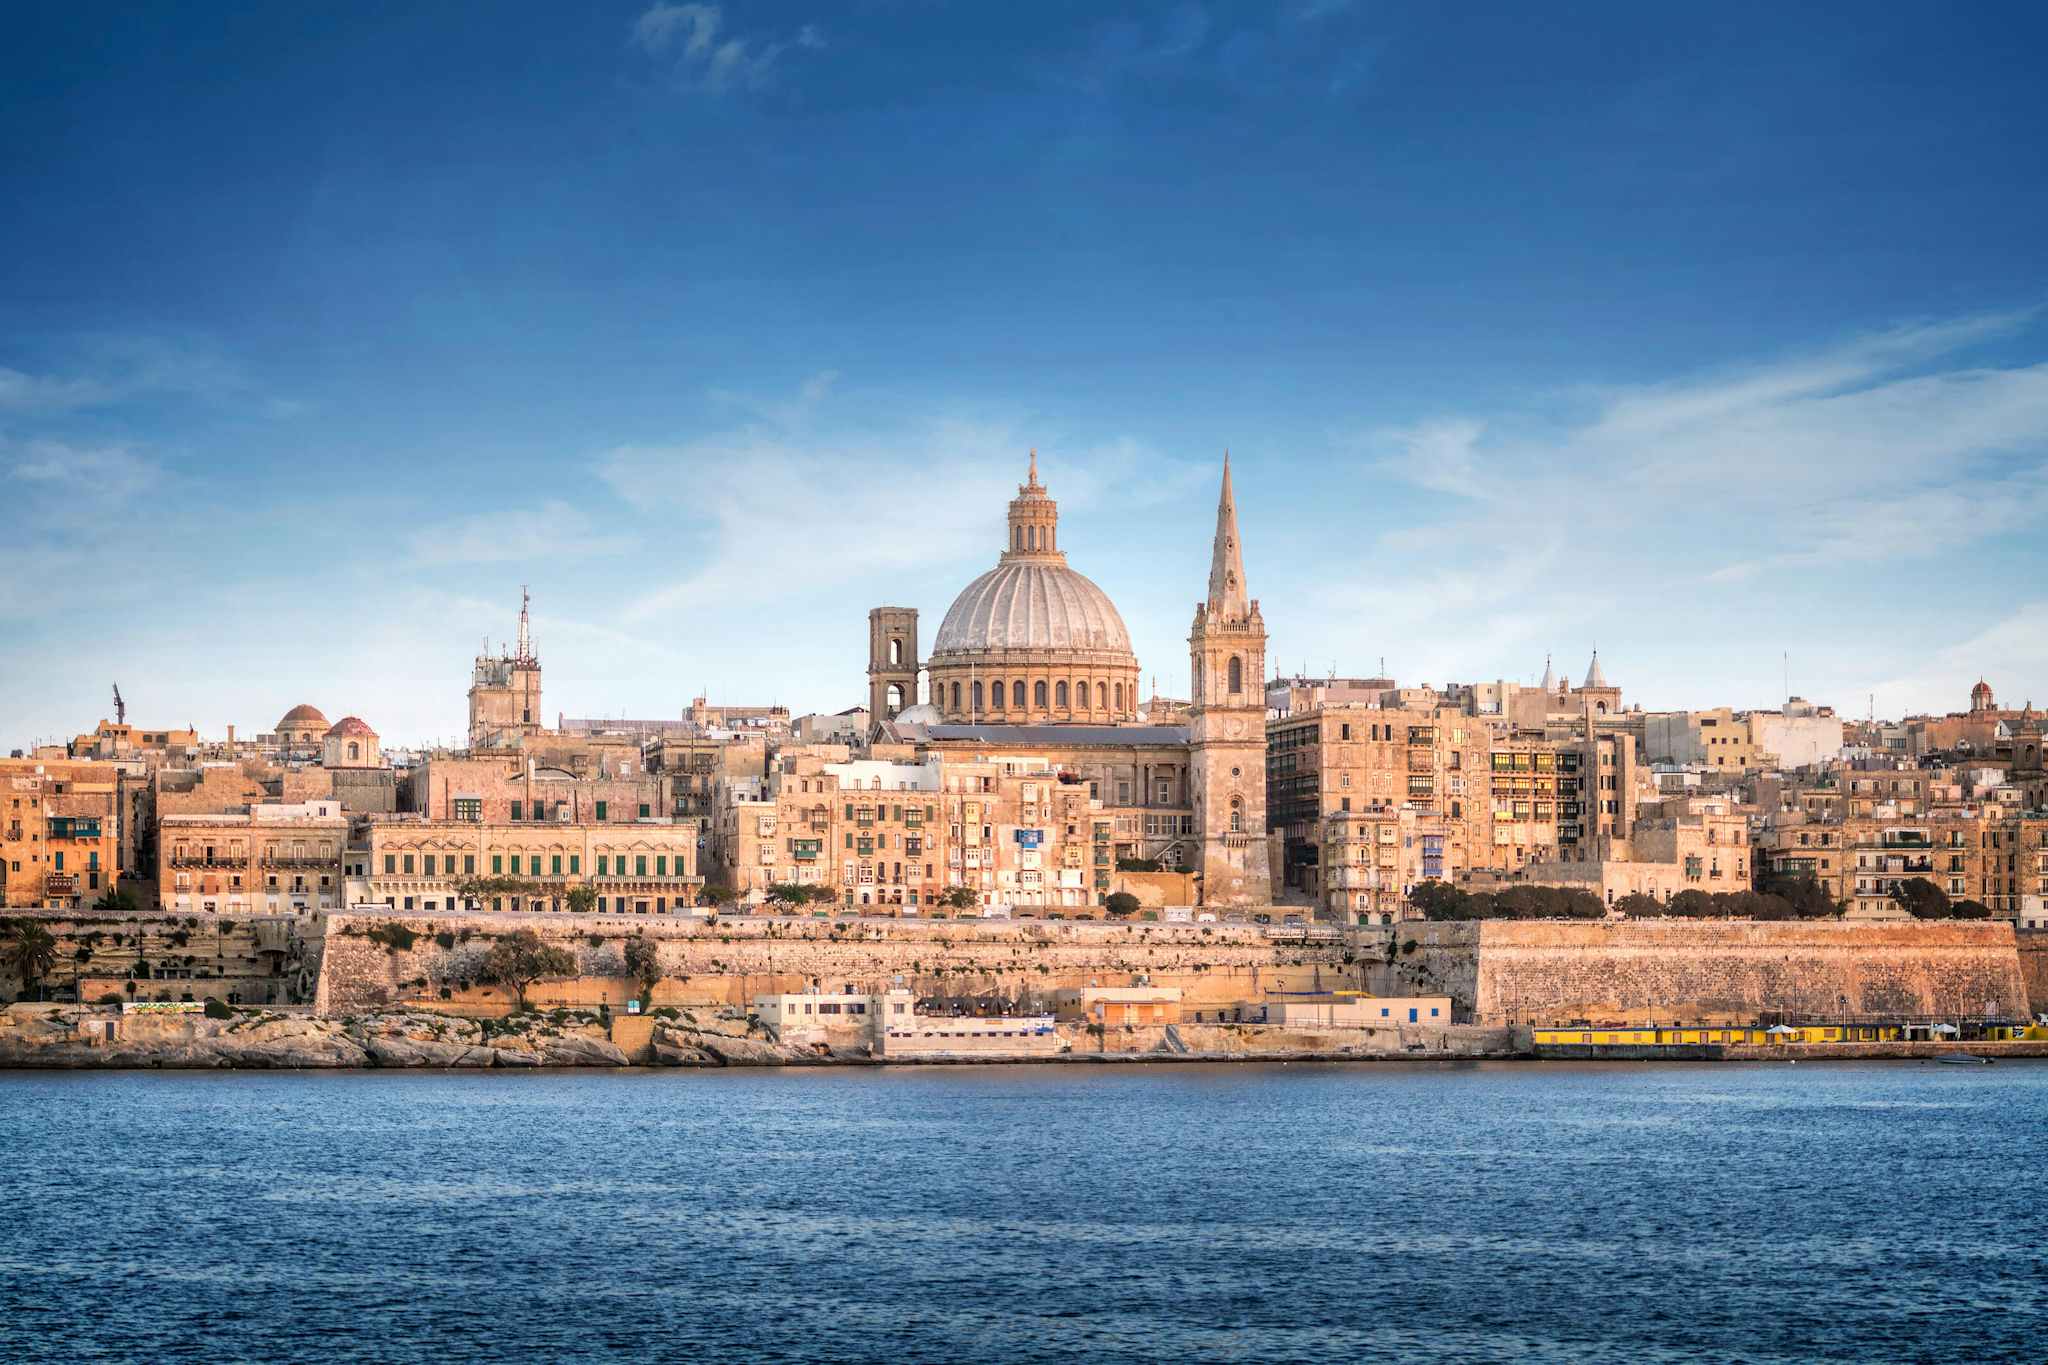 23 BEST Malta (Valletta) Shore Excursions: Things to Do, Cruise